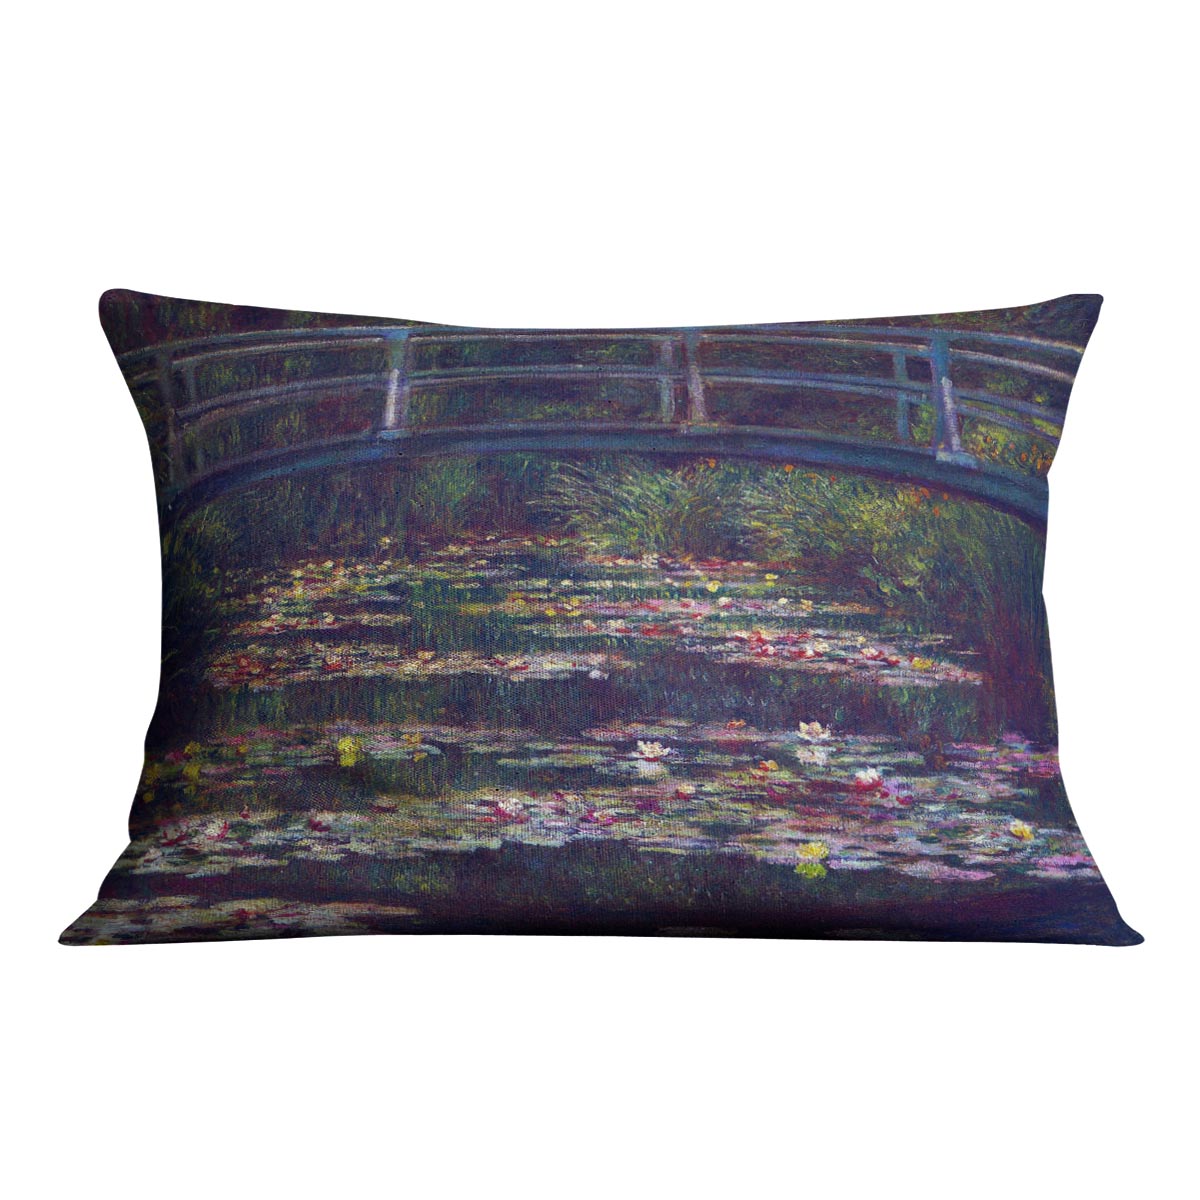 Water Lily Pond 5 by Monet Cushion